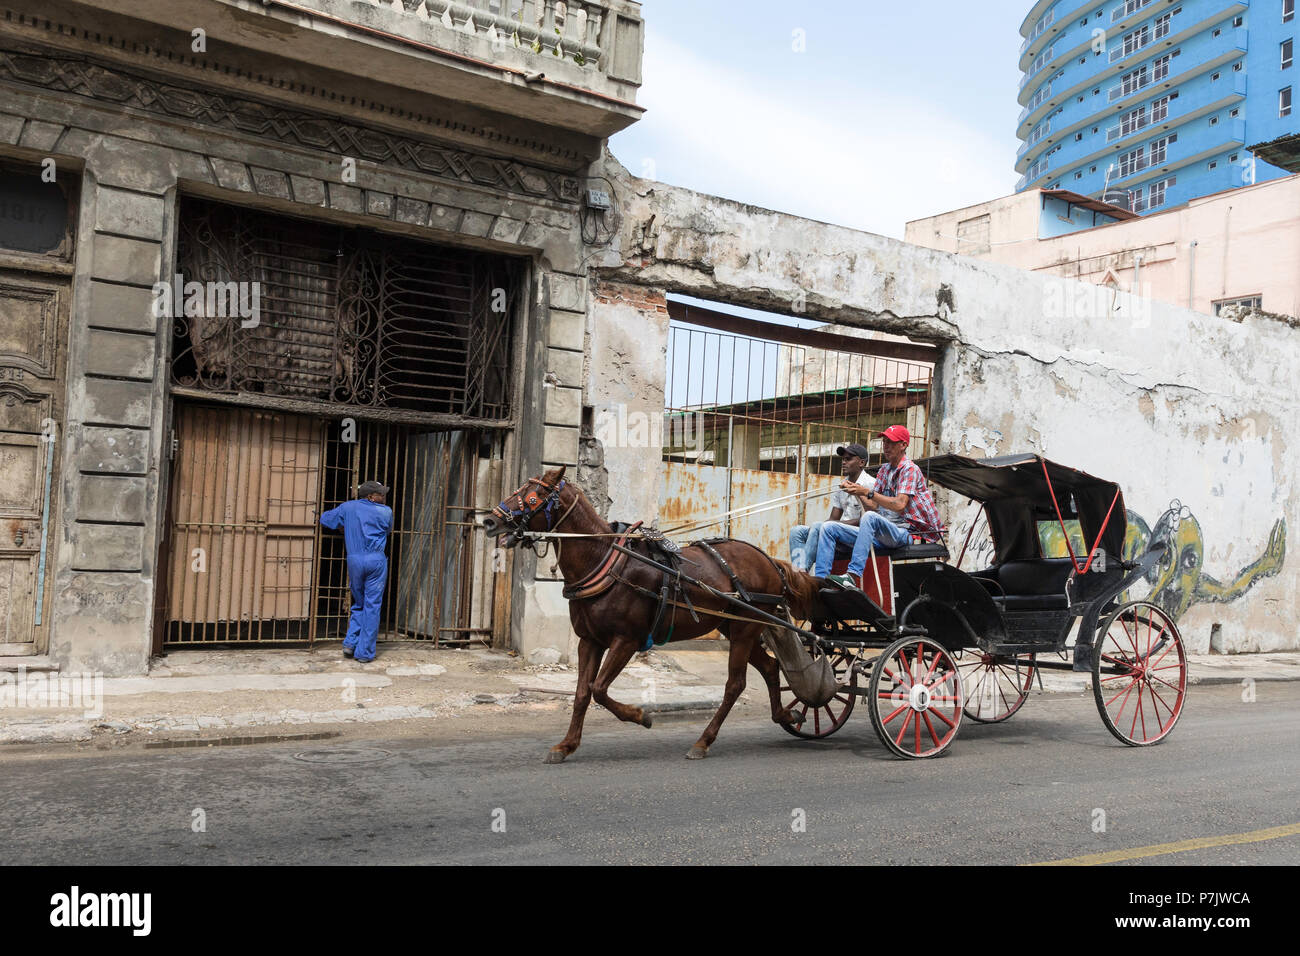 Horse-drawn carts known locally as coches for hire in Havana, Cuba Stock Photo